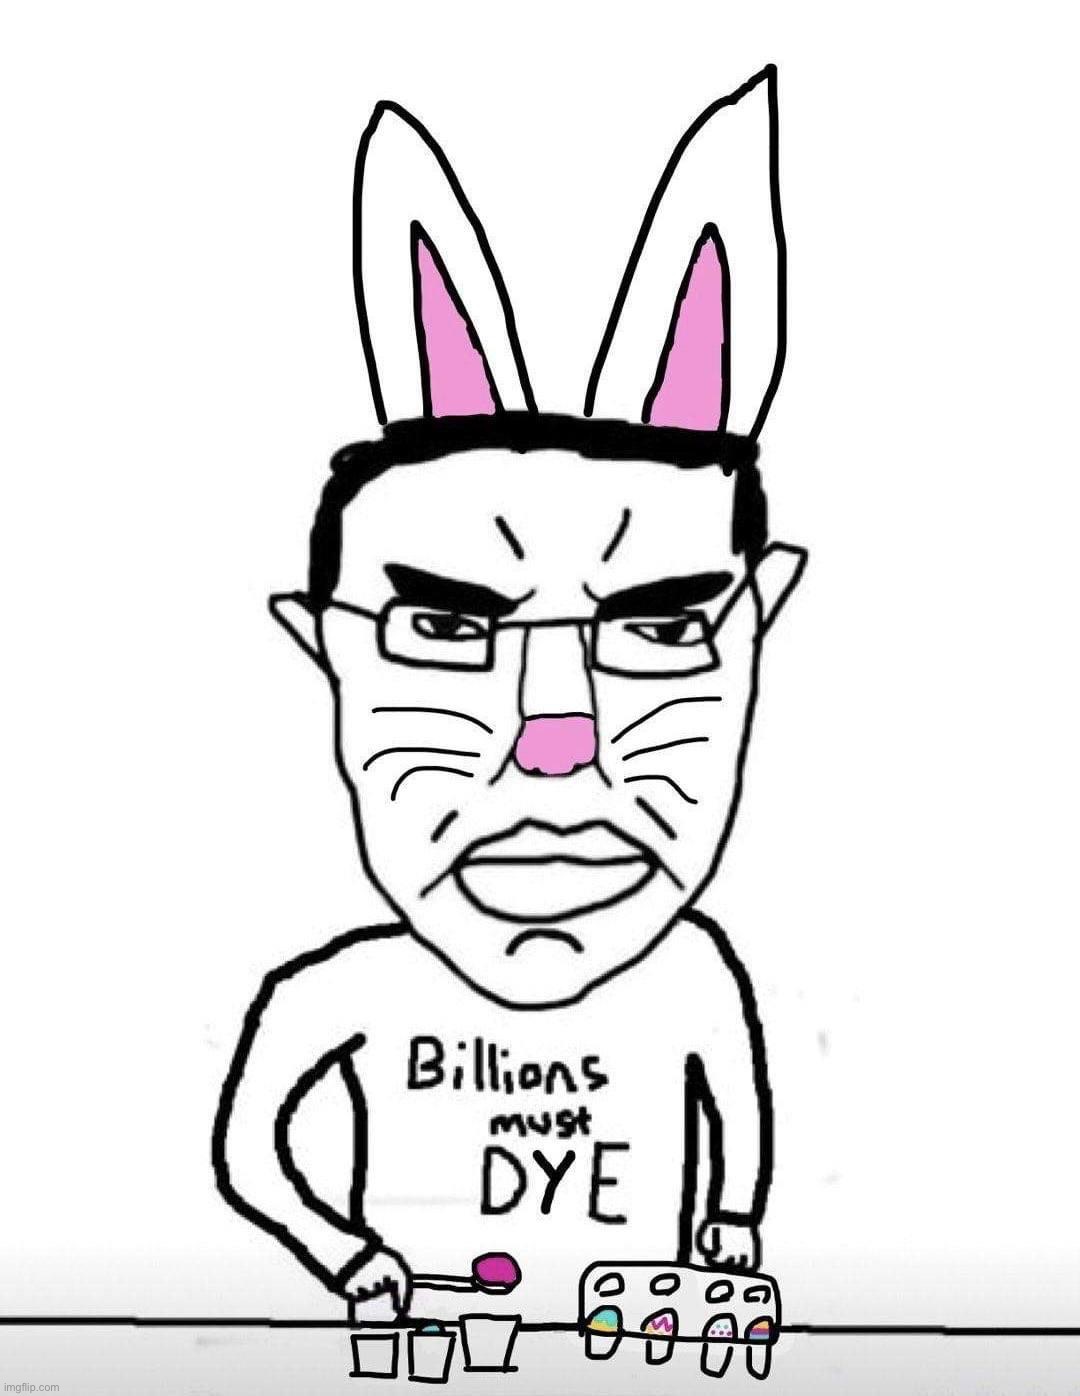 Easter bunny billions must dye | image tagged in easter bunny billions must dye | made w/ Imgflip meme maker